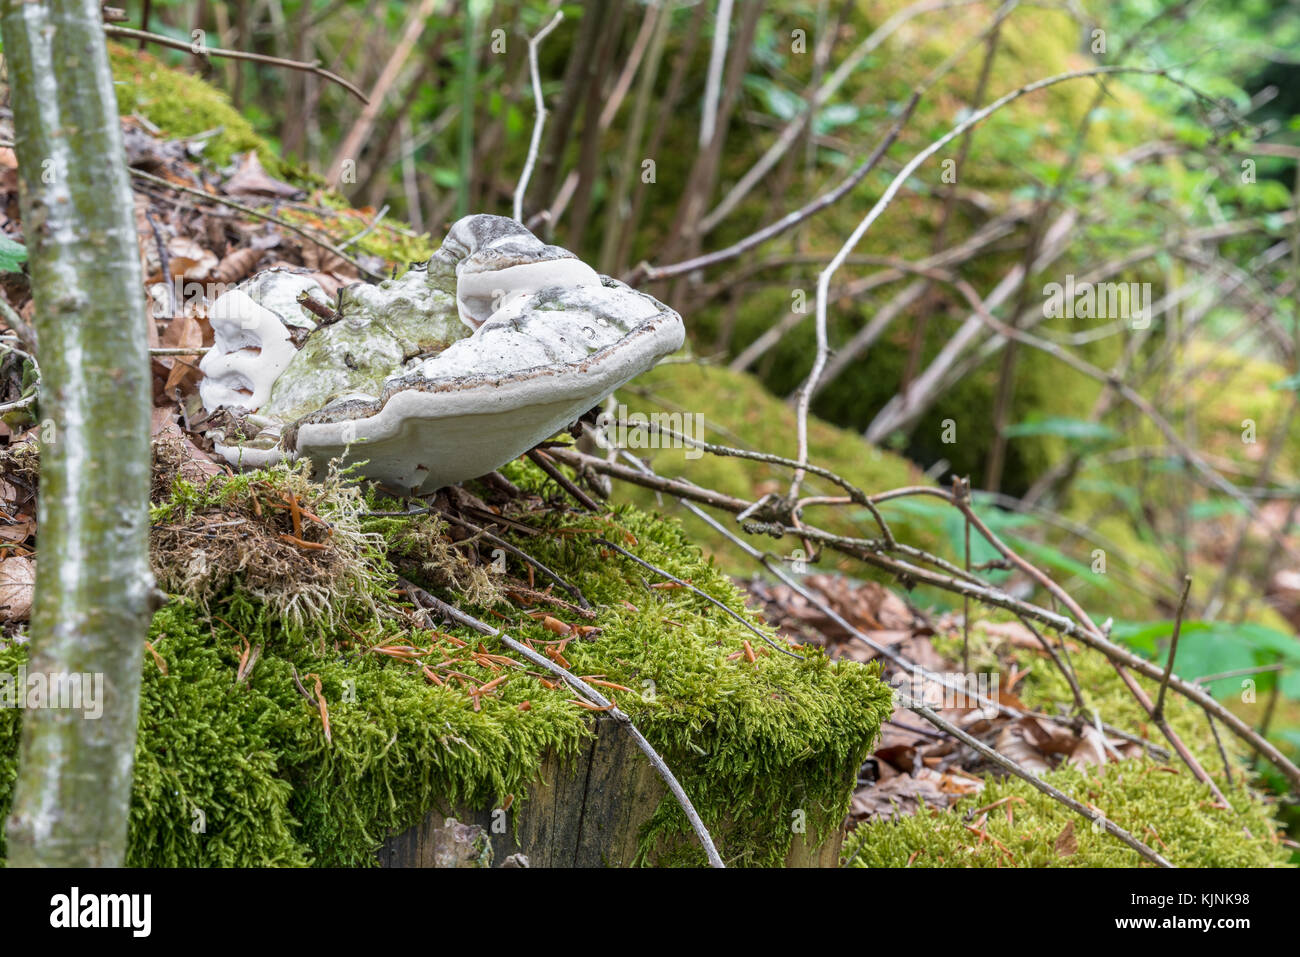 White tree fungus on a overgrown stone with moss Stock Photo